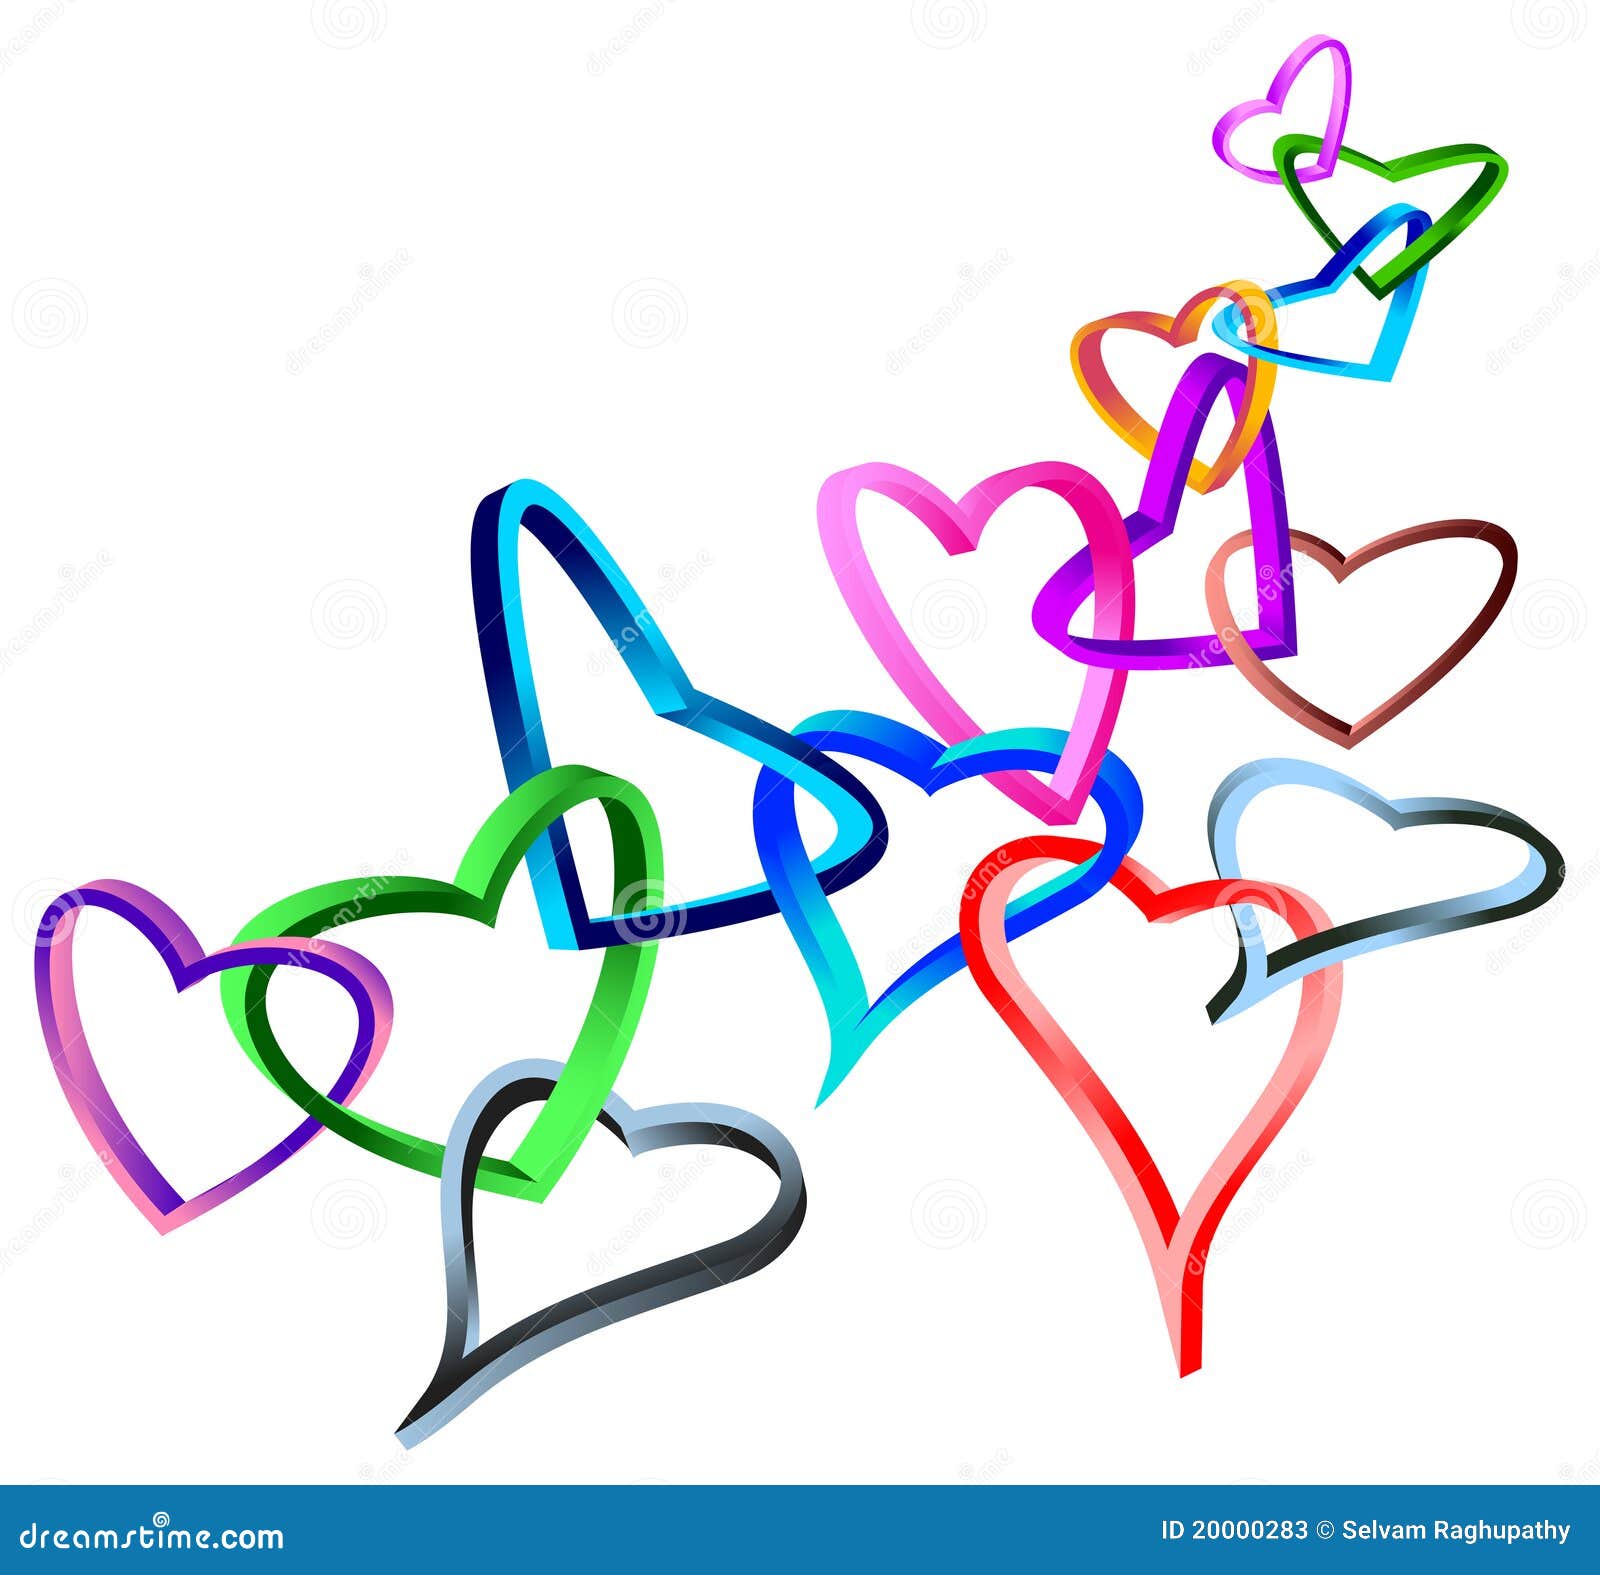 linked 3 d hearts